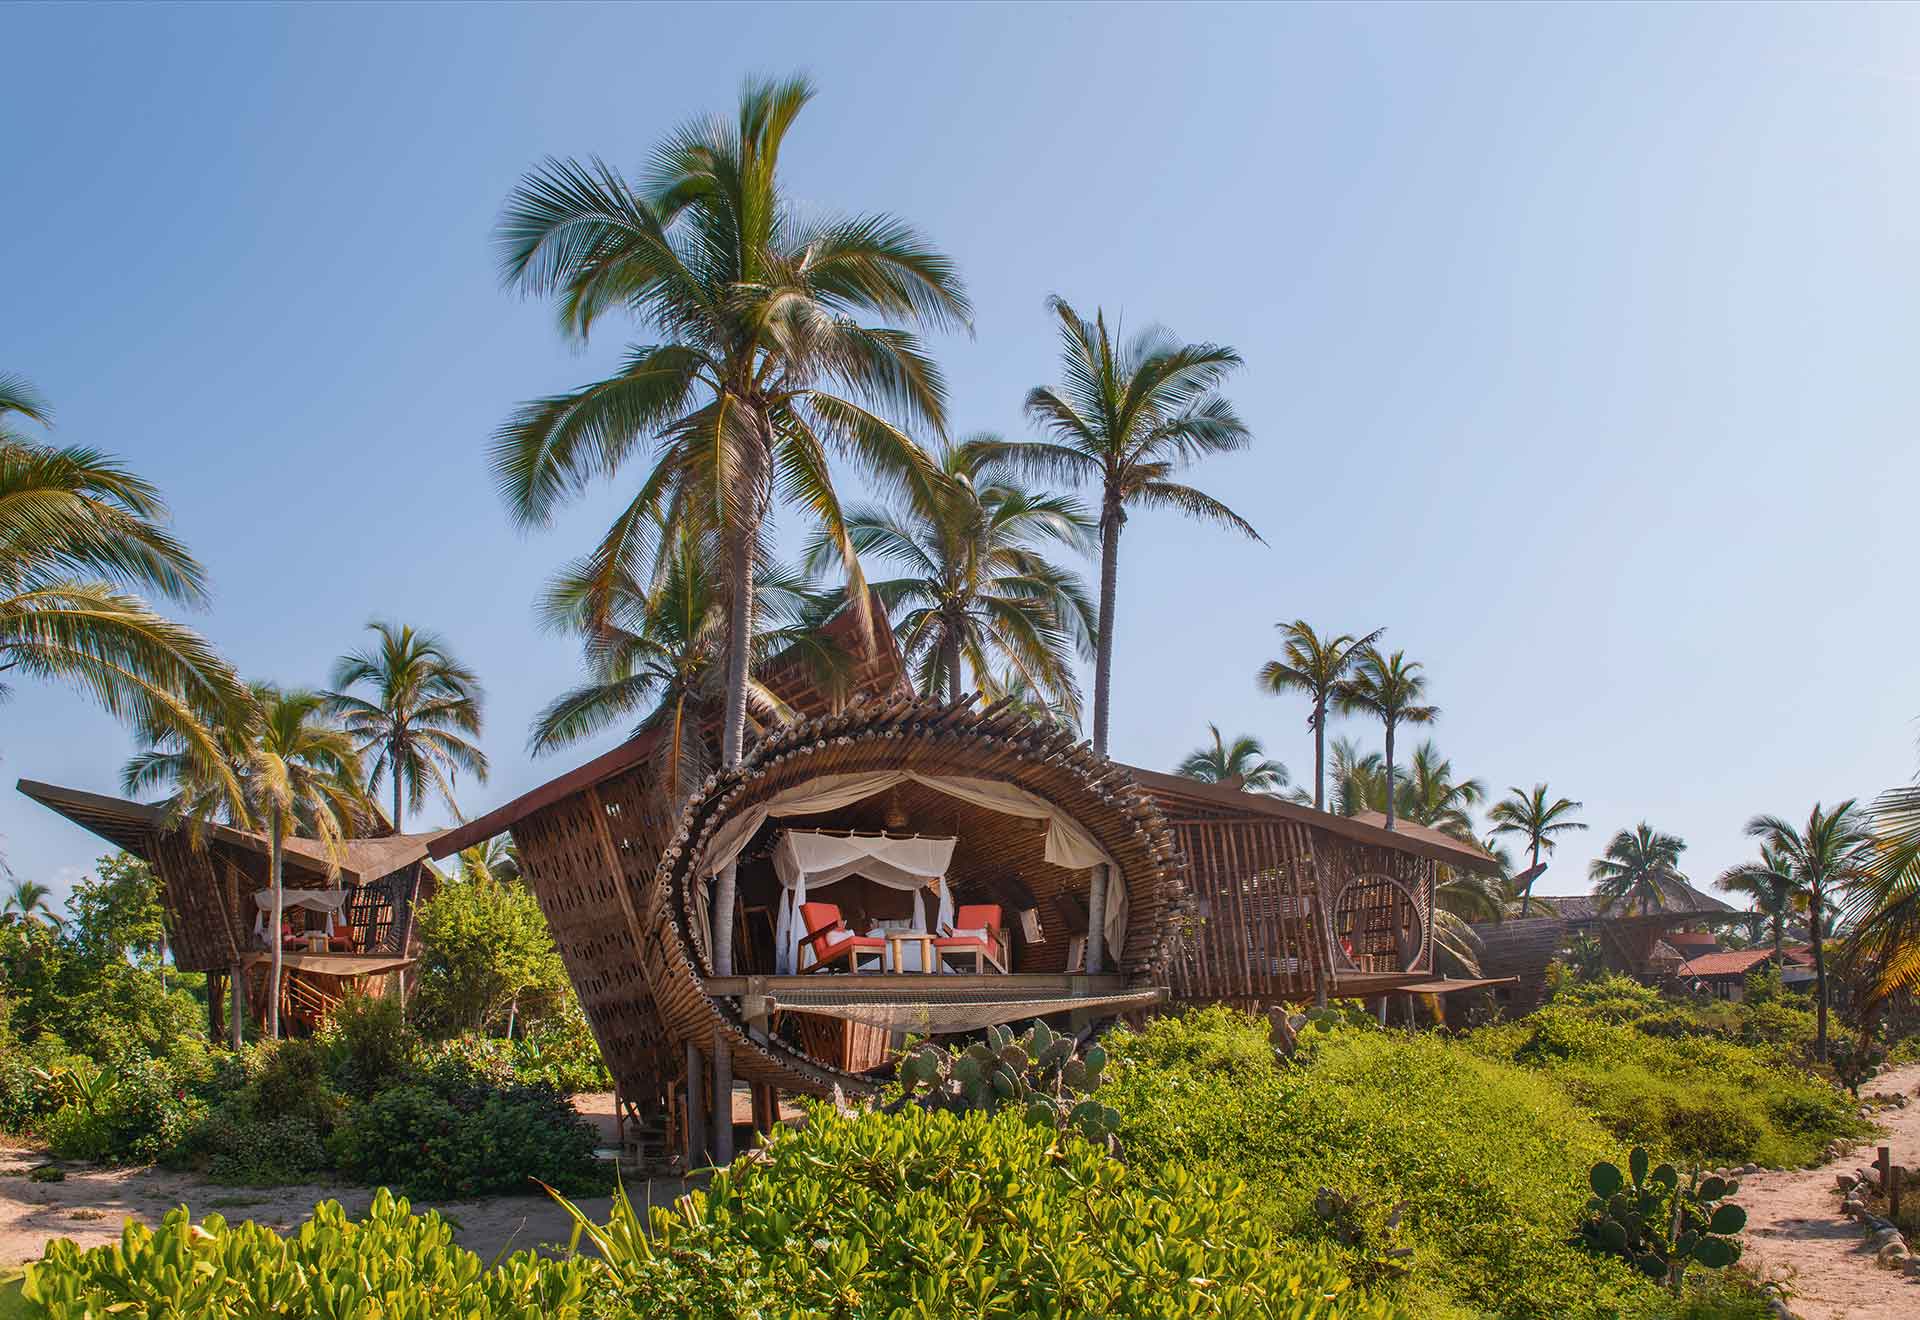 Green, palm-lined exterior of Playa Viva in Mexico